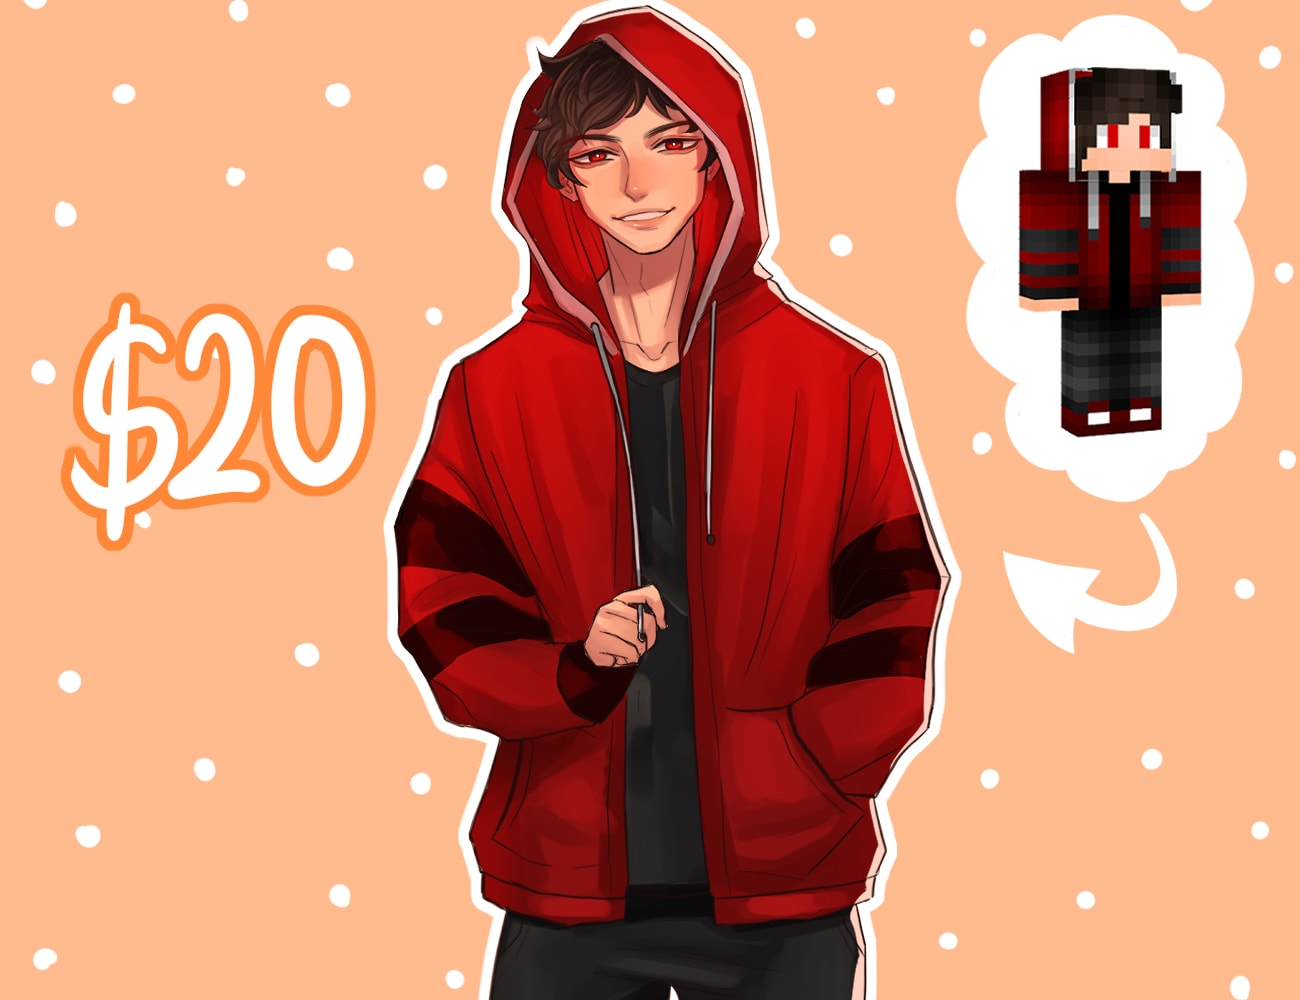 Draw your roblox avatar, royale high avatar, minecraft skin by Y0on1e_